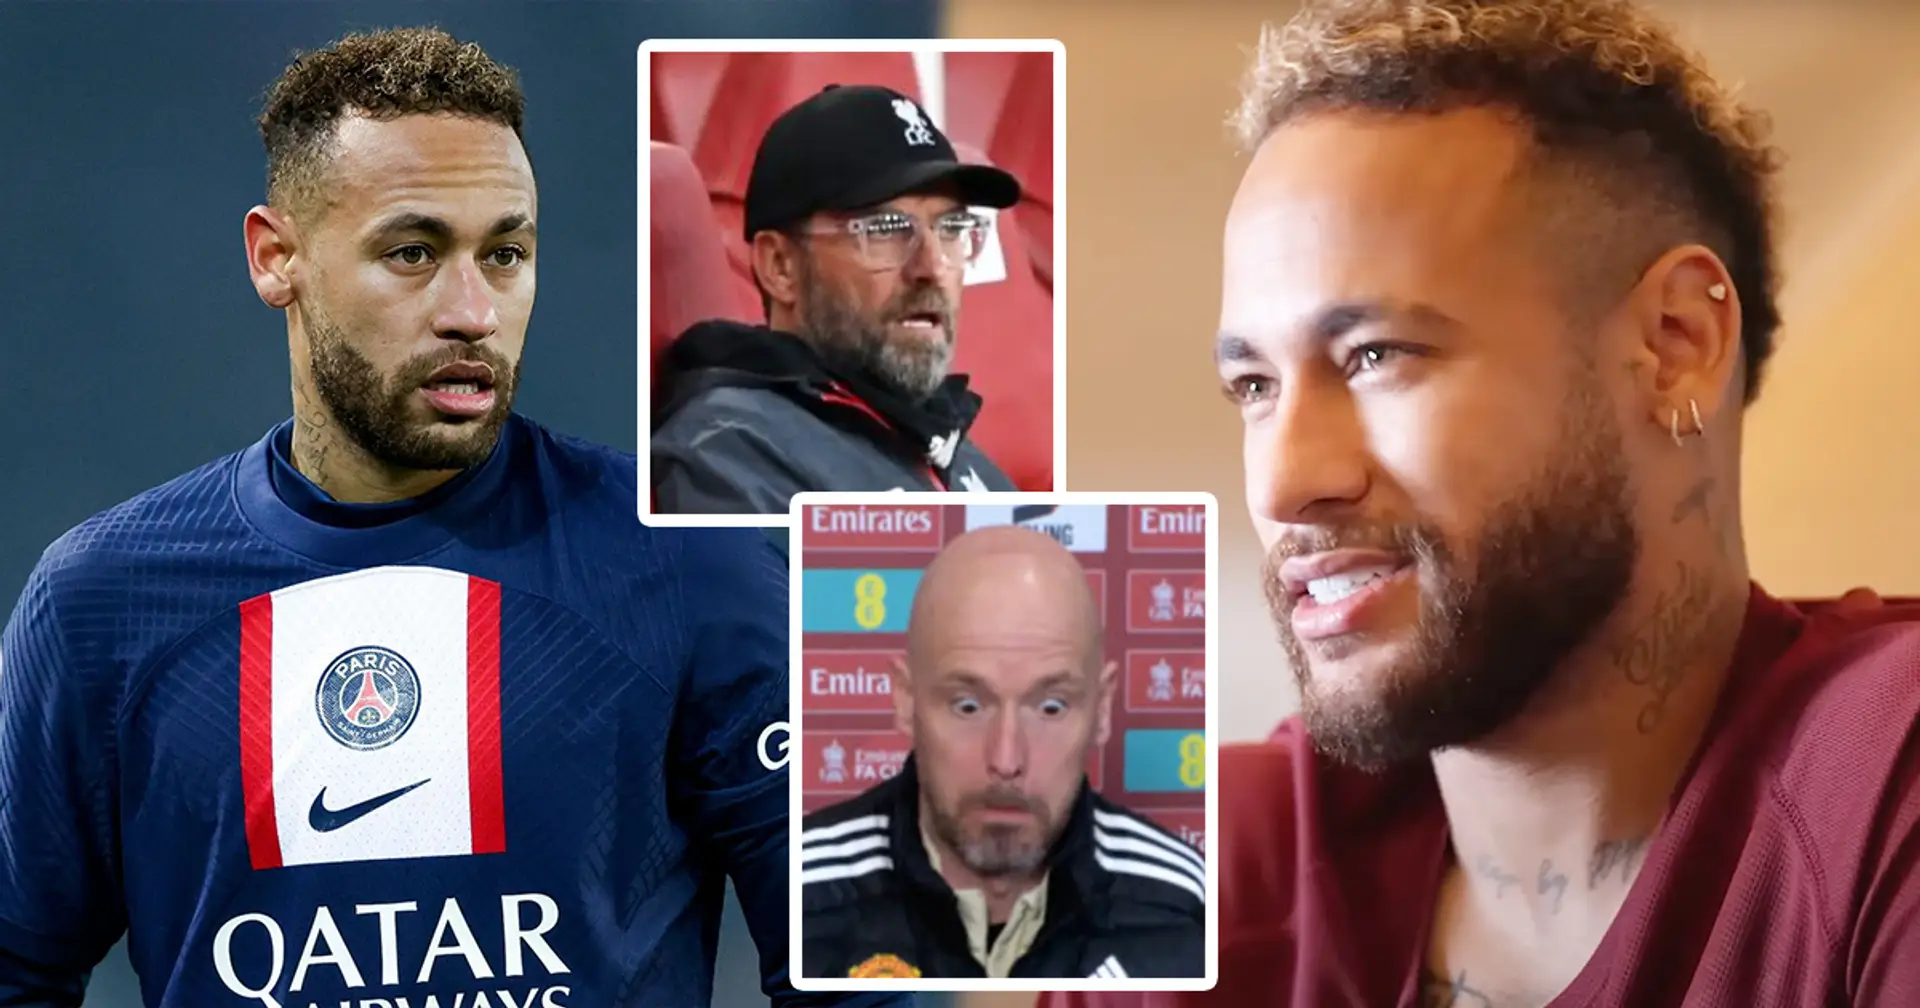 Neymar has revealed the four Premier League clubs he would be interested in joining